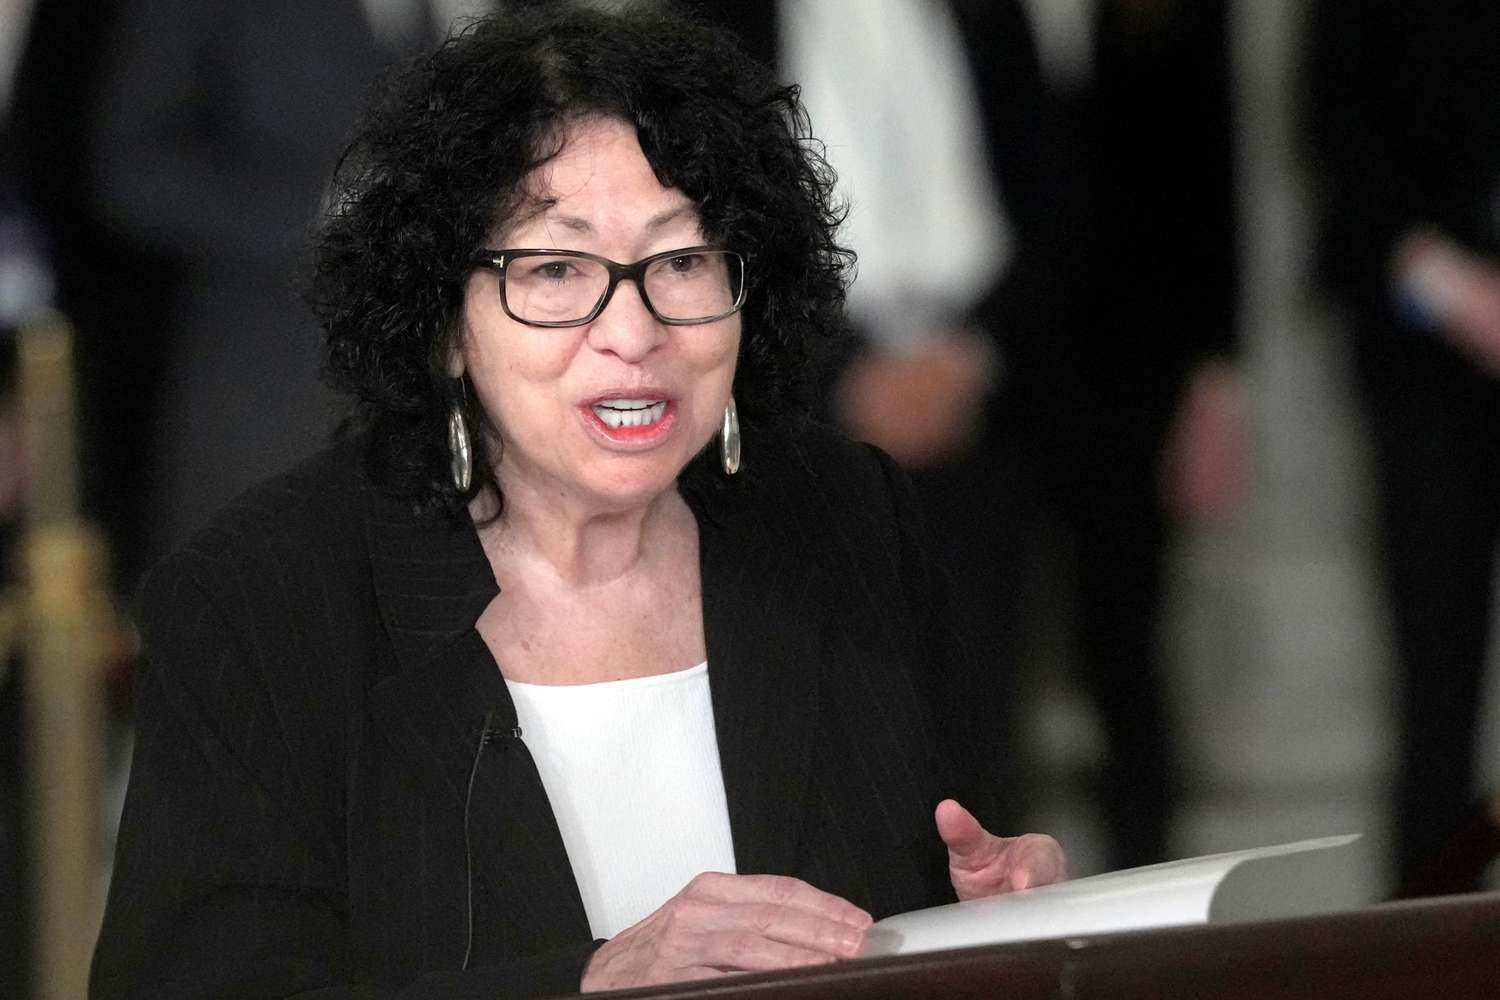 Concerns over Justice Sotomayor's health reignite discussions about potential vacancies (Credits: Getty Images)